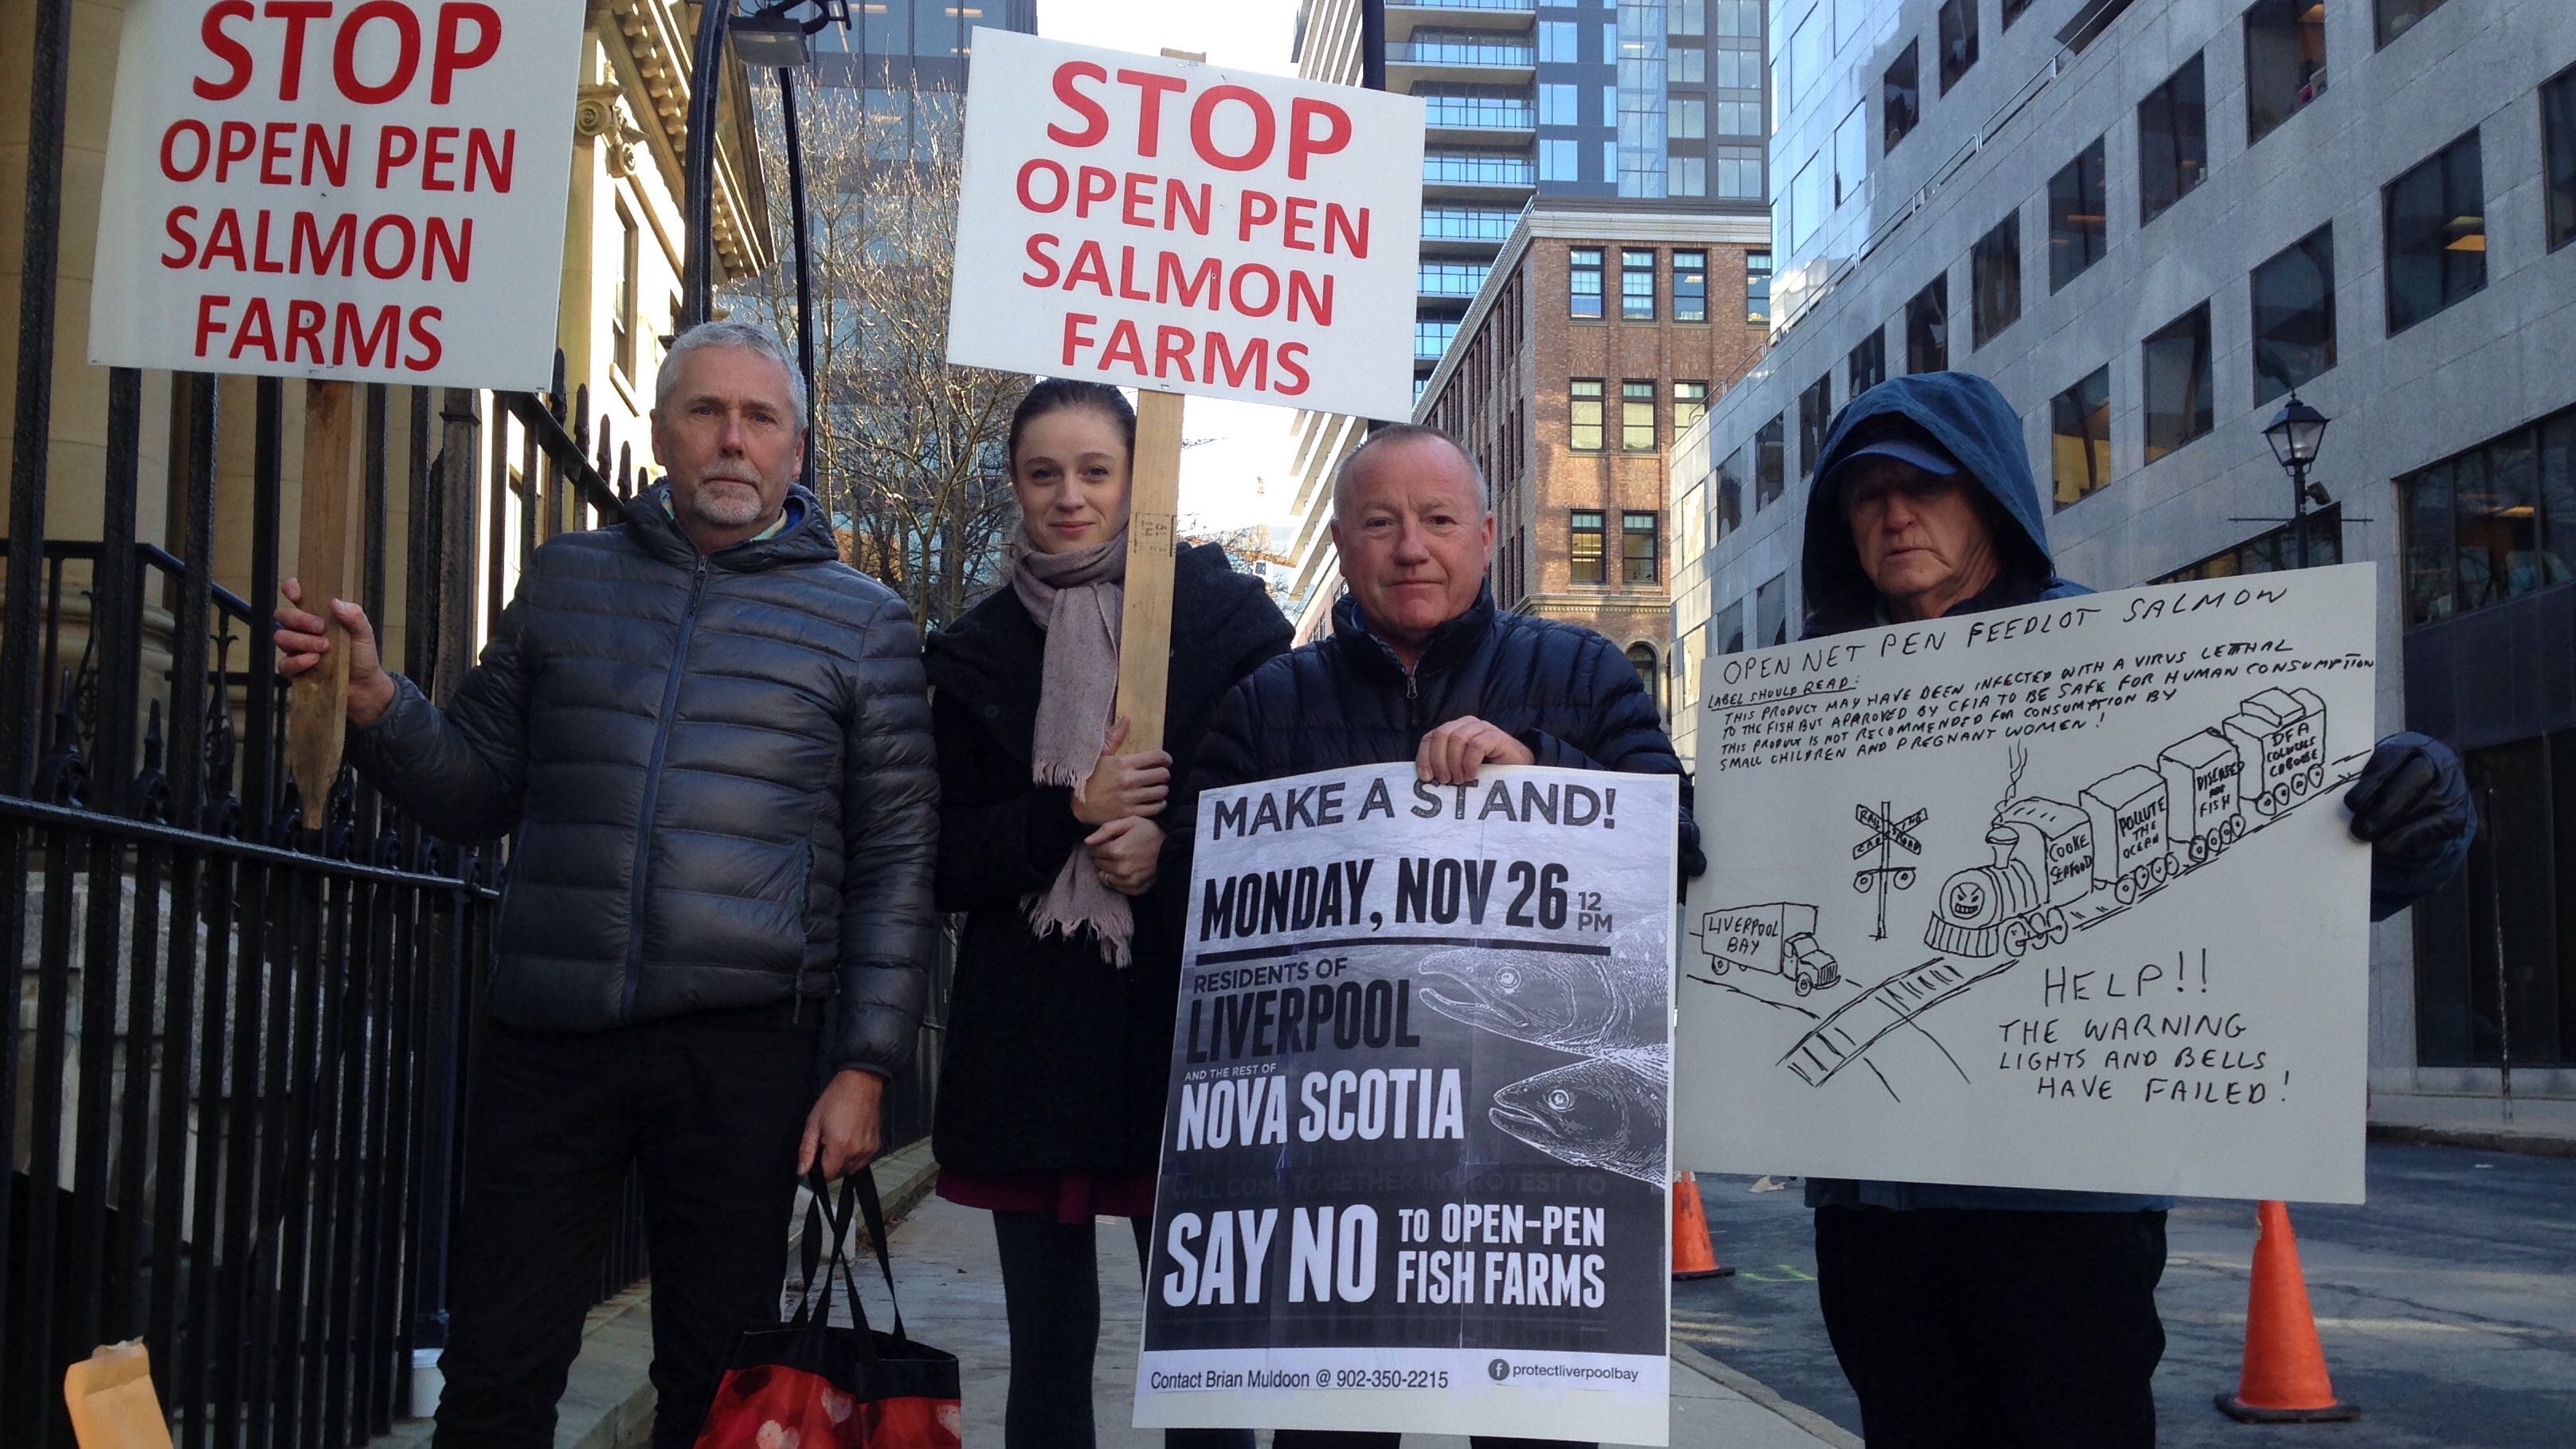 Protesters gather outside Province House on Nov. 26 to voice their opposition to proposed fish farms in Liverpool.